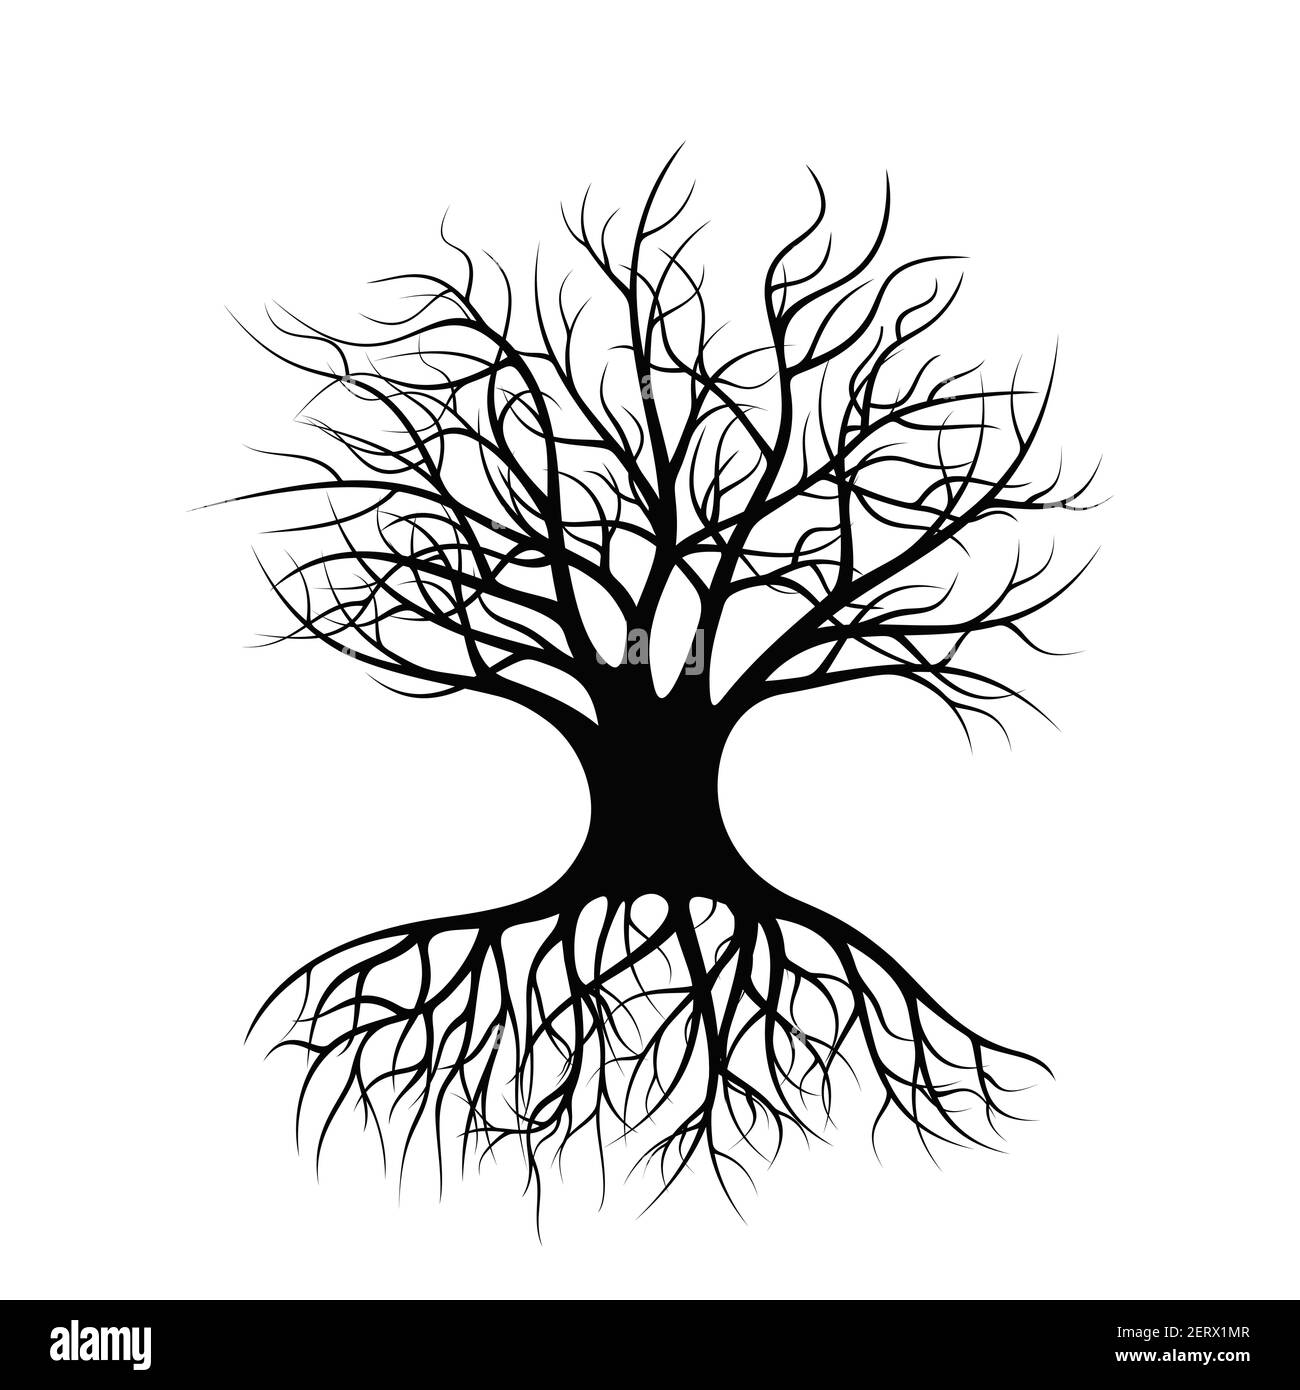 A Lonely Standing Tree with Roots and no Foliage. Black Silhouette of a Tree. Stock Vector